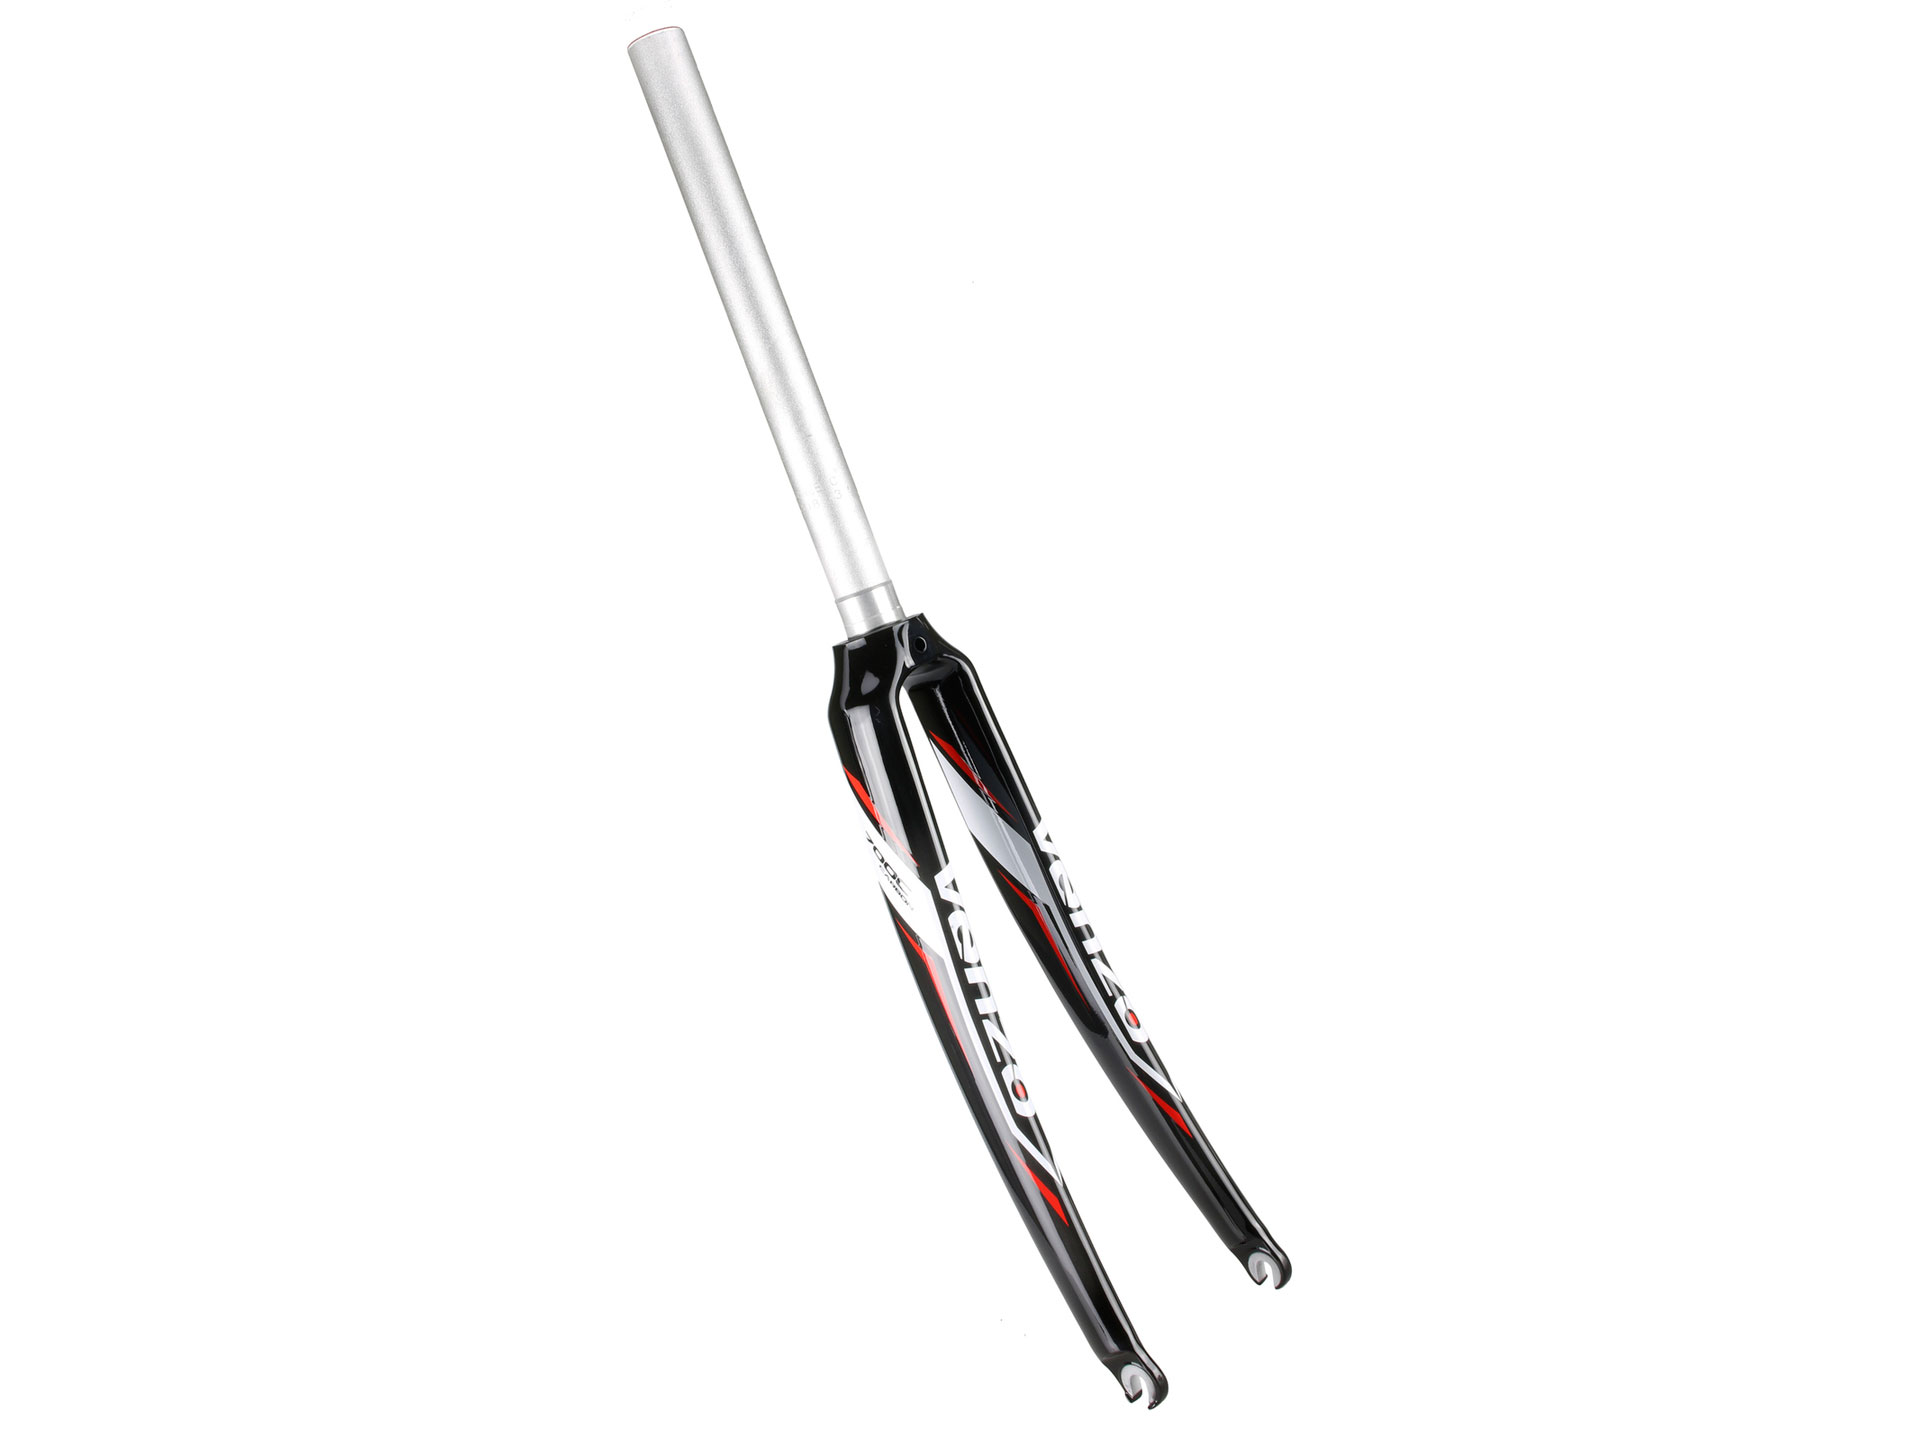 Venzo 700C Carbon Road Fork - Made in Taiwan B02R-004